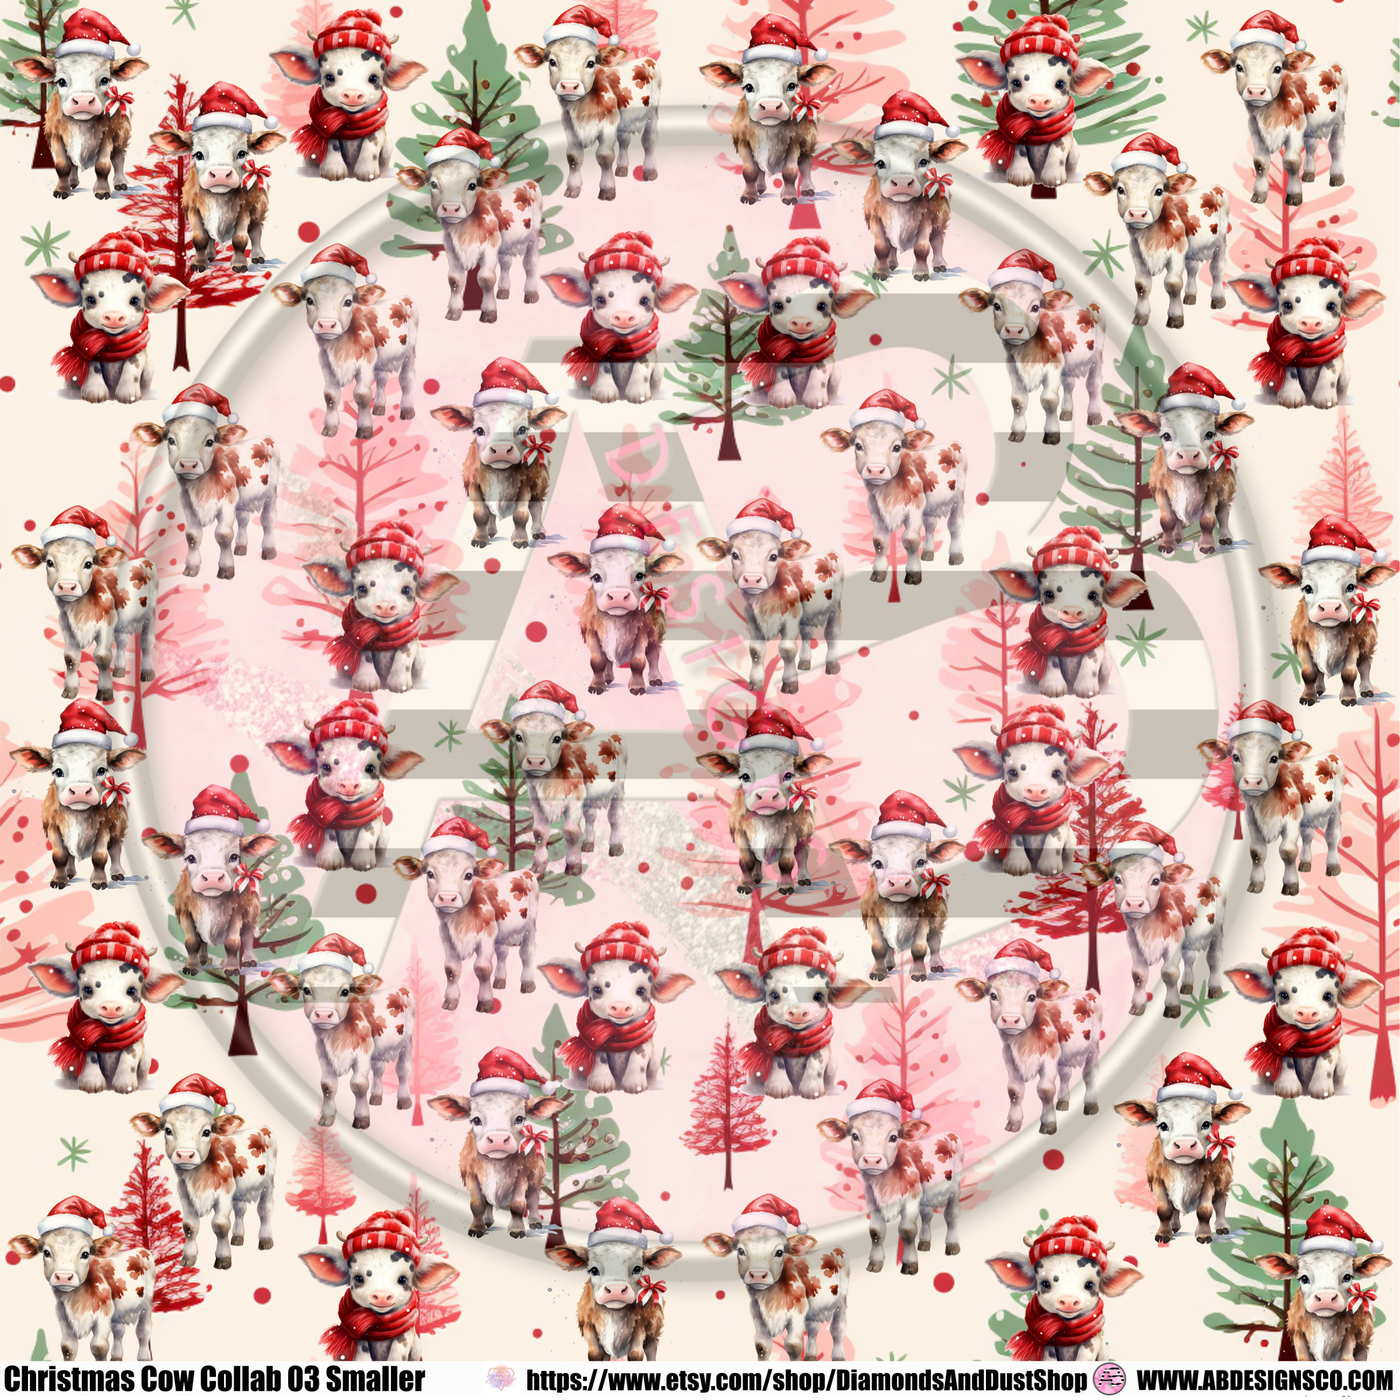 Adhesive Patterned Vinyl - Christmas Cow Collab 03 Smaller